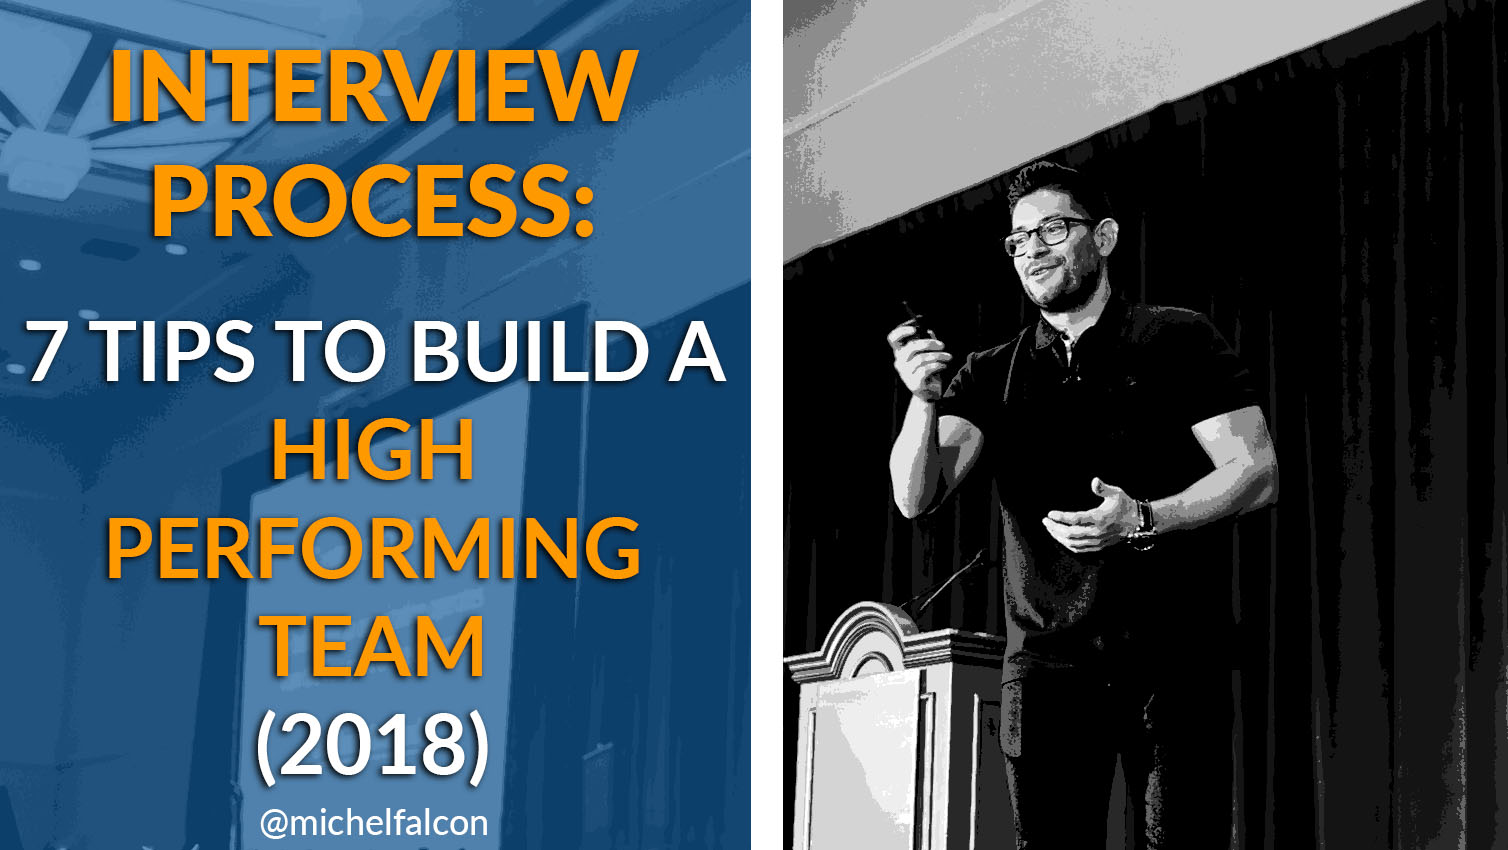 Interview Process: 7 Tips to Build a High Performing Team (2018)